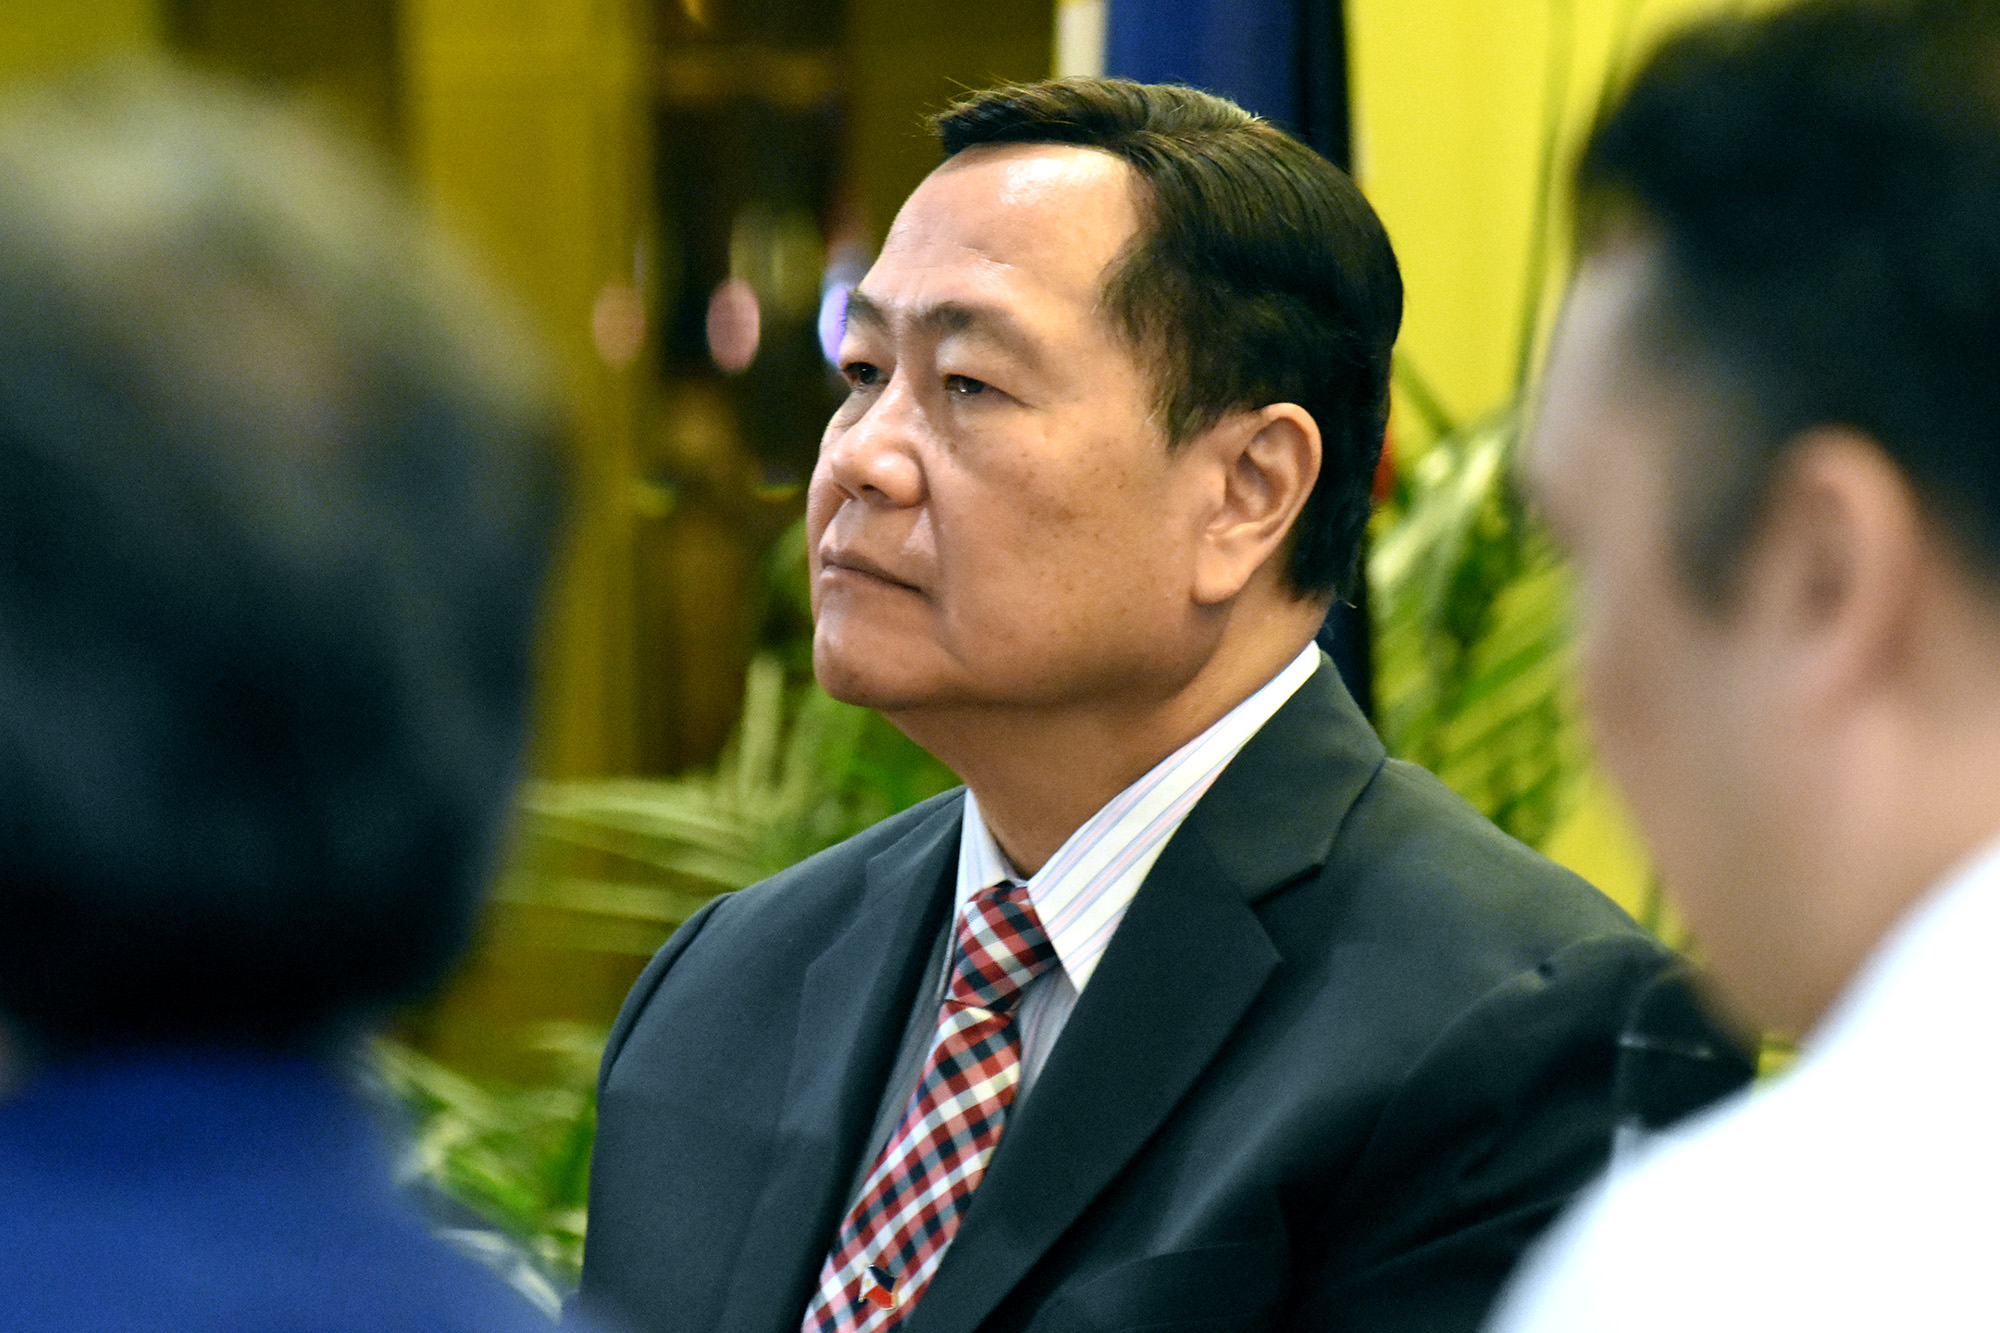 DEFENDER. Acting Chief Justice Antonio Carpio, a West Philippine Sea advocate, attends 'Kasarinlan: A Philippine Foreign Policy Forum' on July 9, 2018. Photo by Angie de Silva/Rappler 